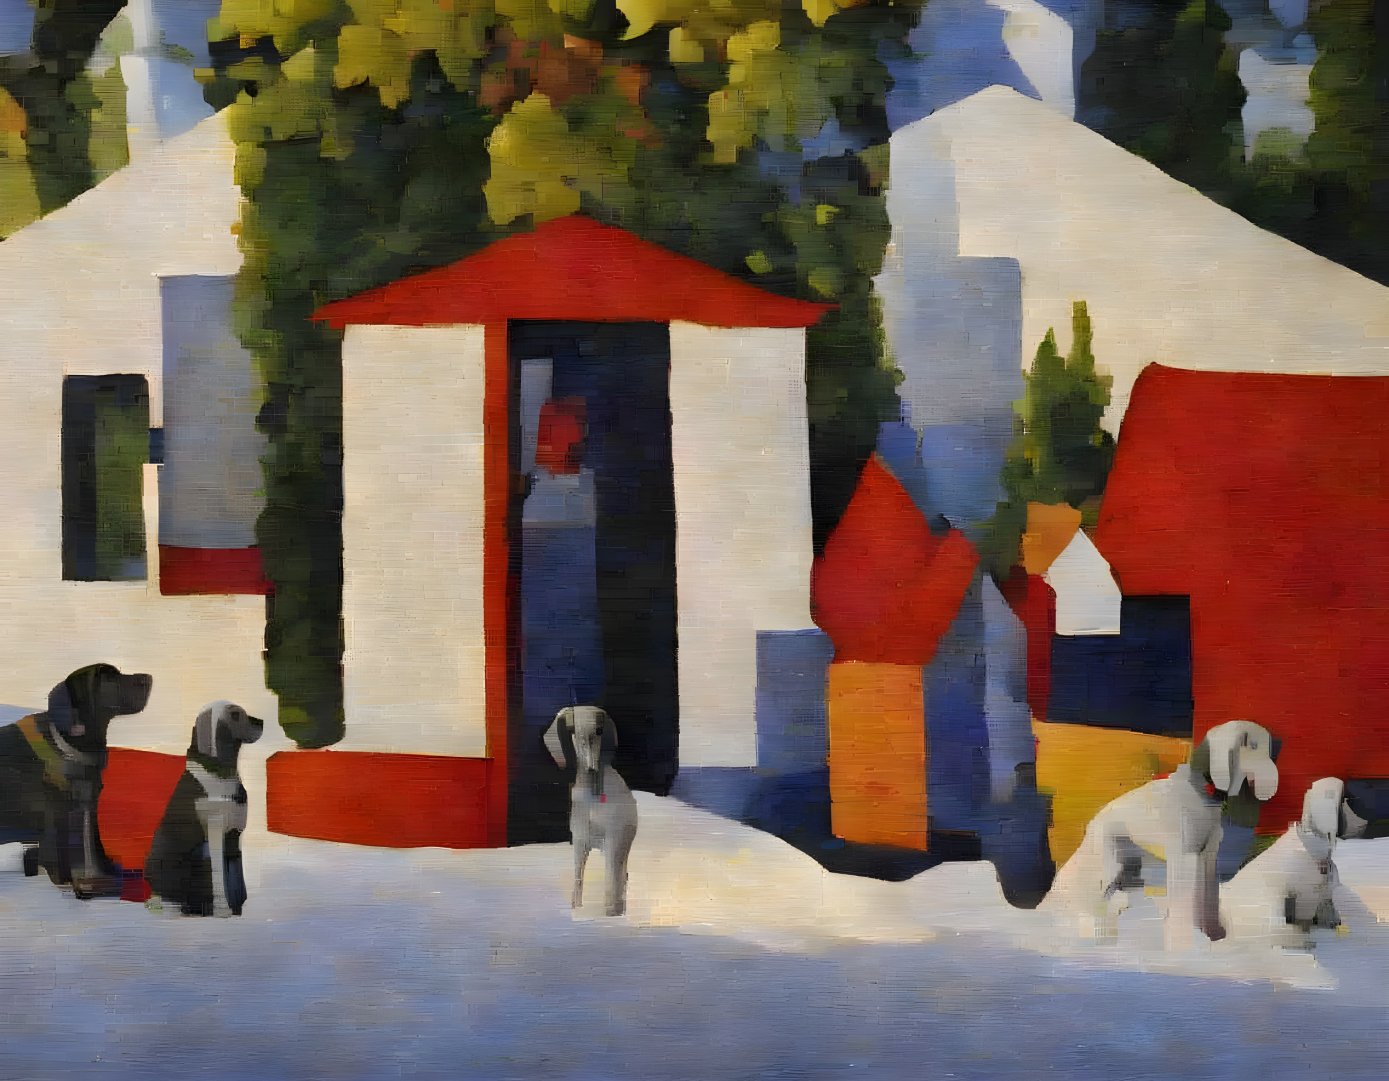 Vibrant painting featuring three dogs and abstract houses